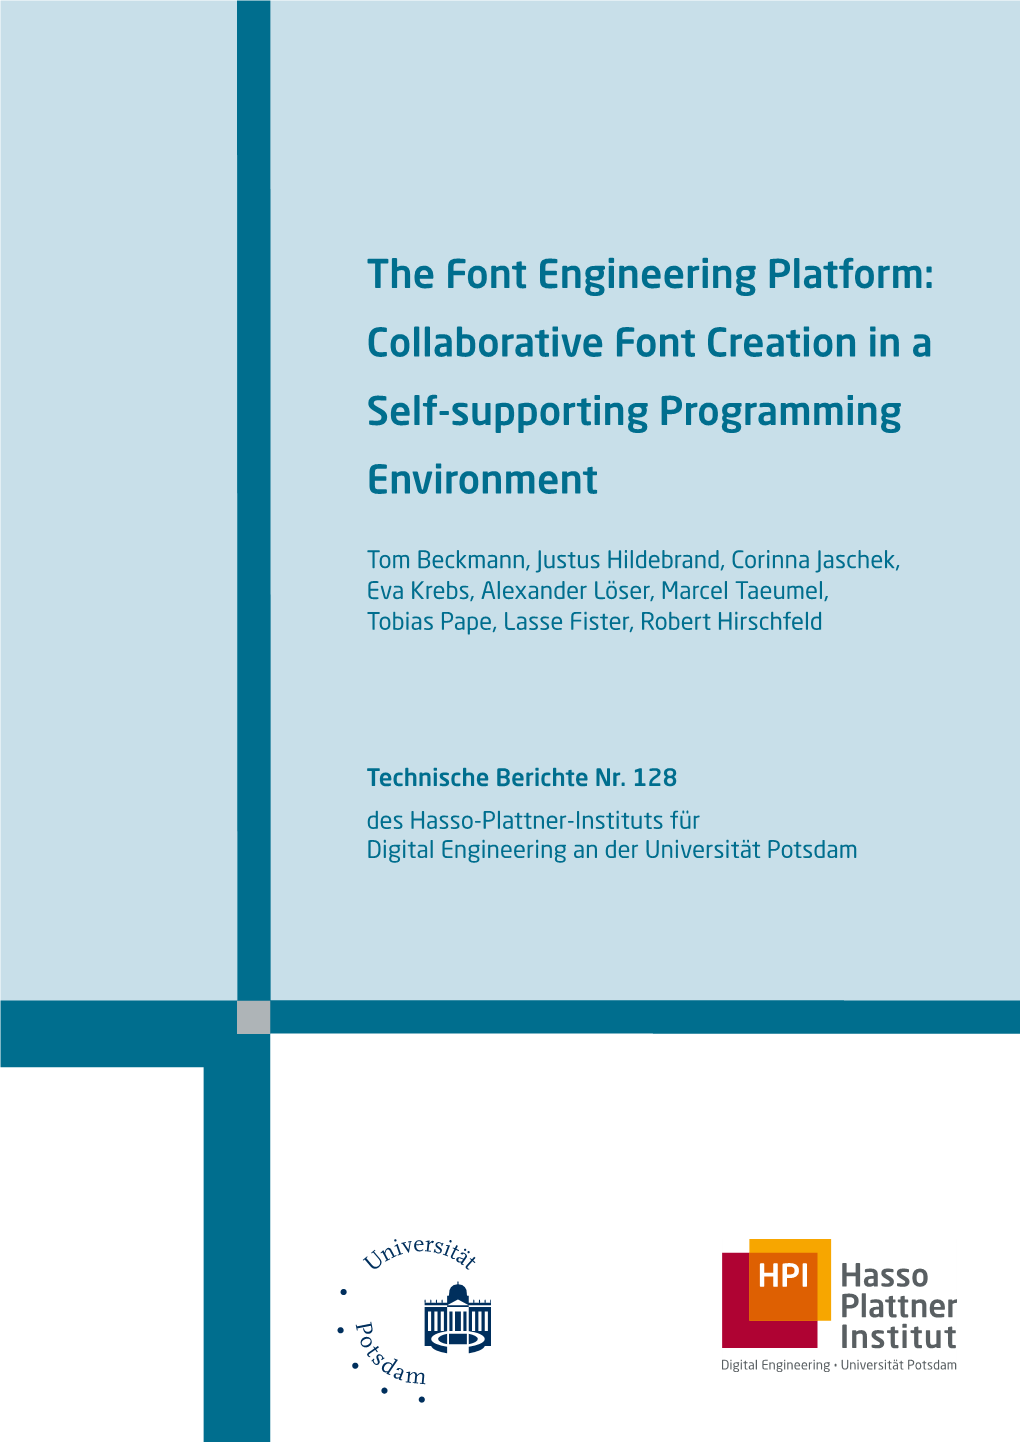 The Font Engineering Platform: Collaborative Font Creation in a Self-Supporting Programming Environment